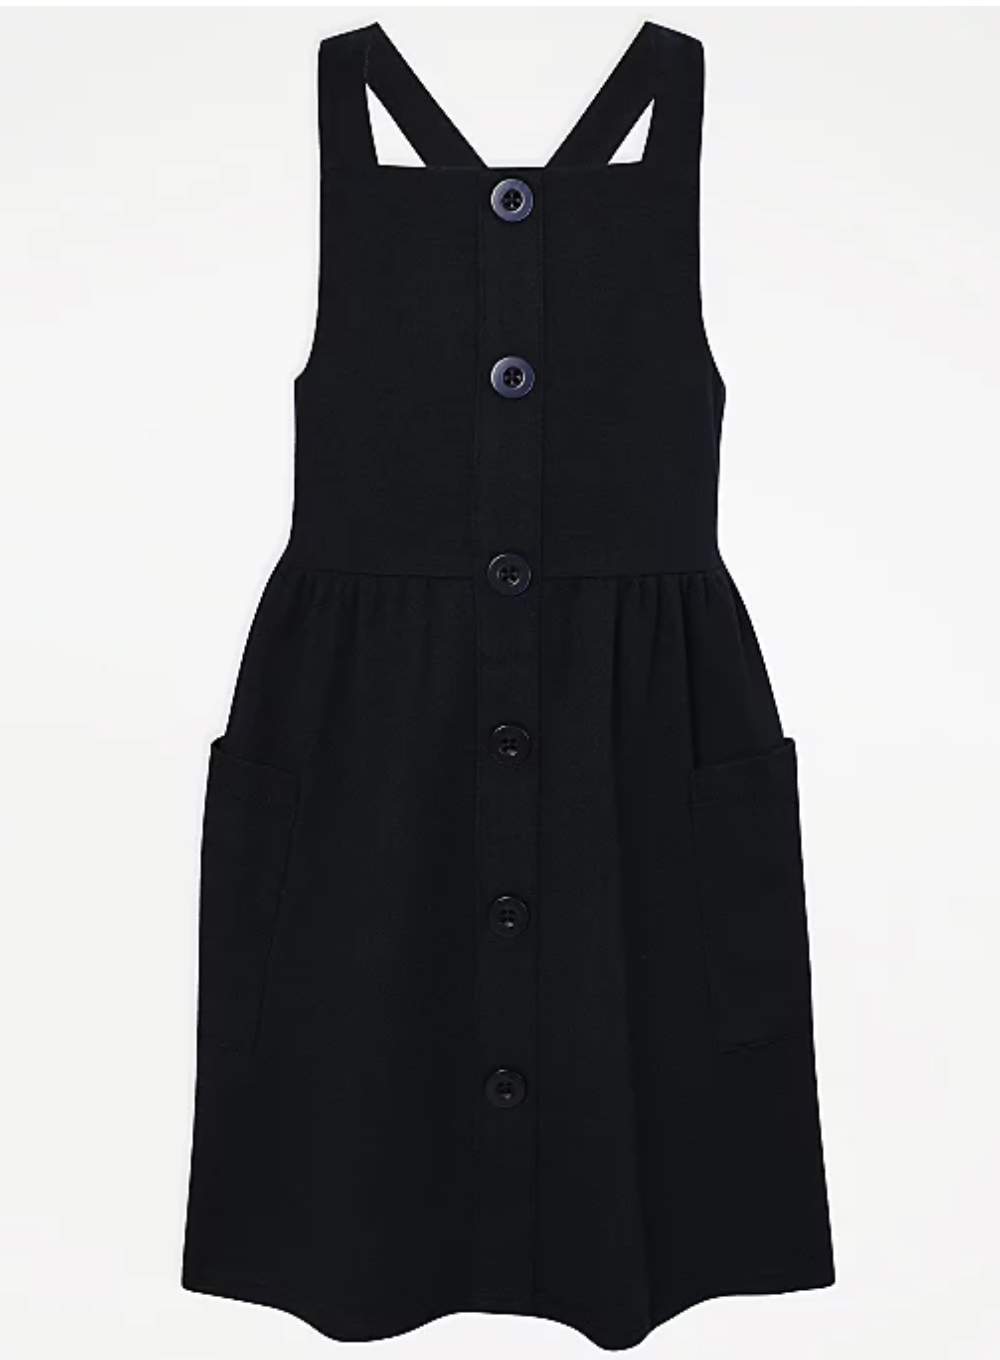 Girls' Navy Sleeveless Jersey Pinafore Dress, Square Neckline, Front Pockets, 7-8 Y